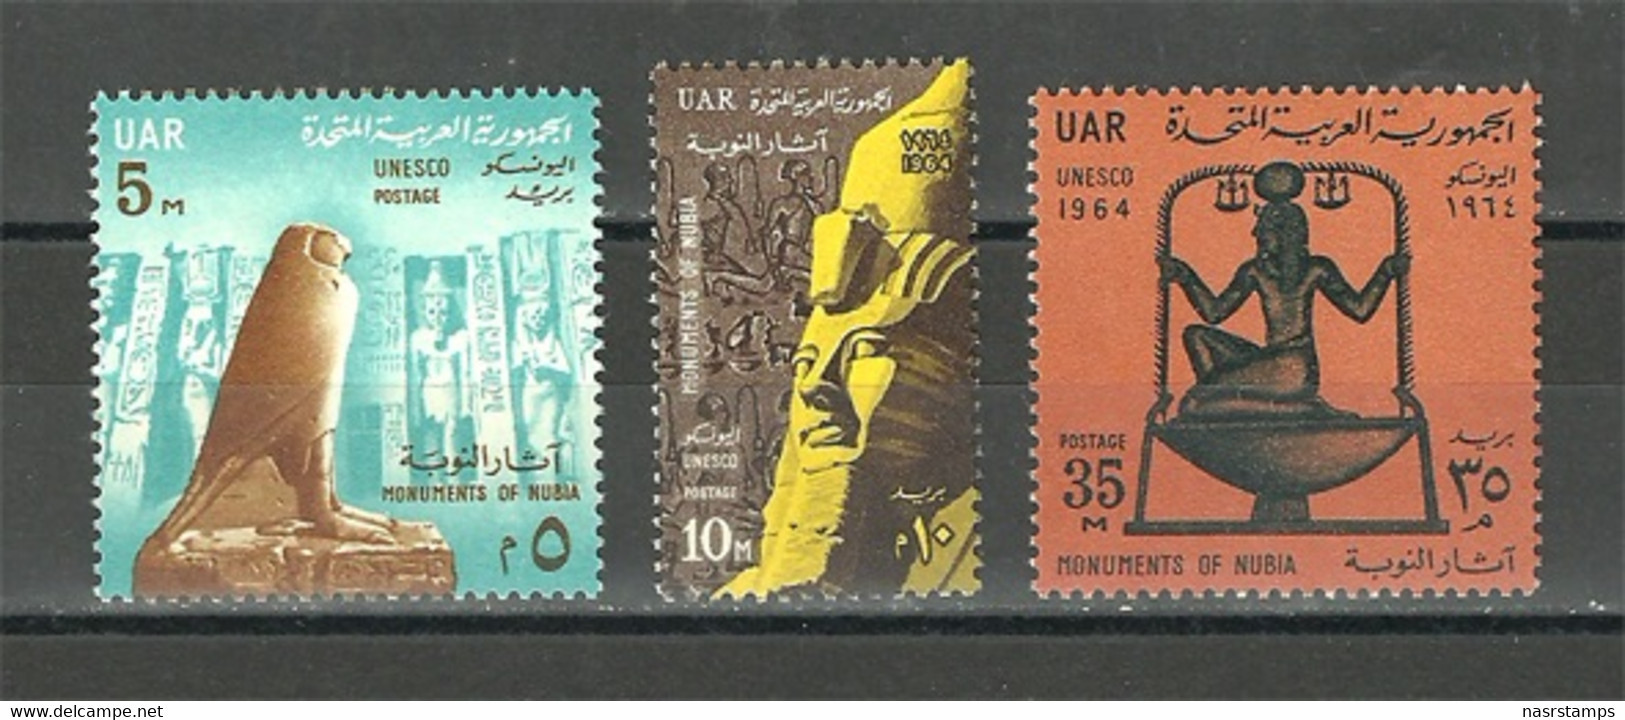 Egypt - 1964 - ( “Save The Monuments Of Nubia” Campaign ) - MNH (**) - Aegyptologie